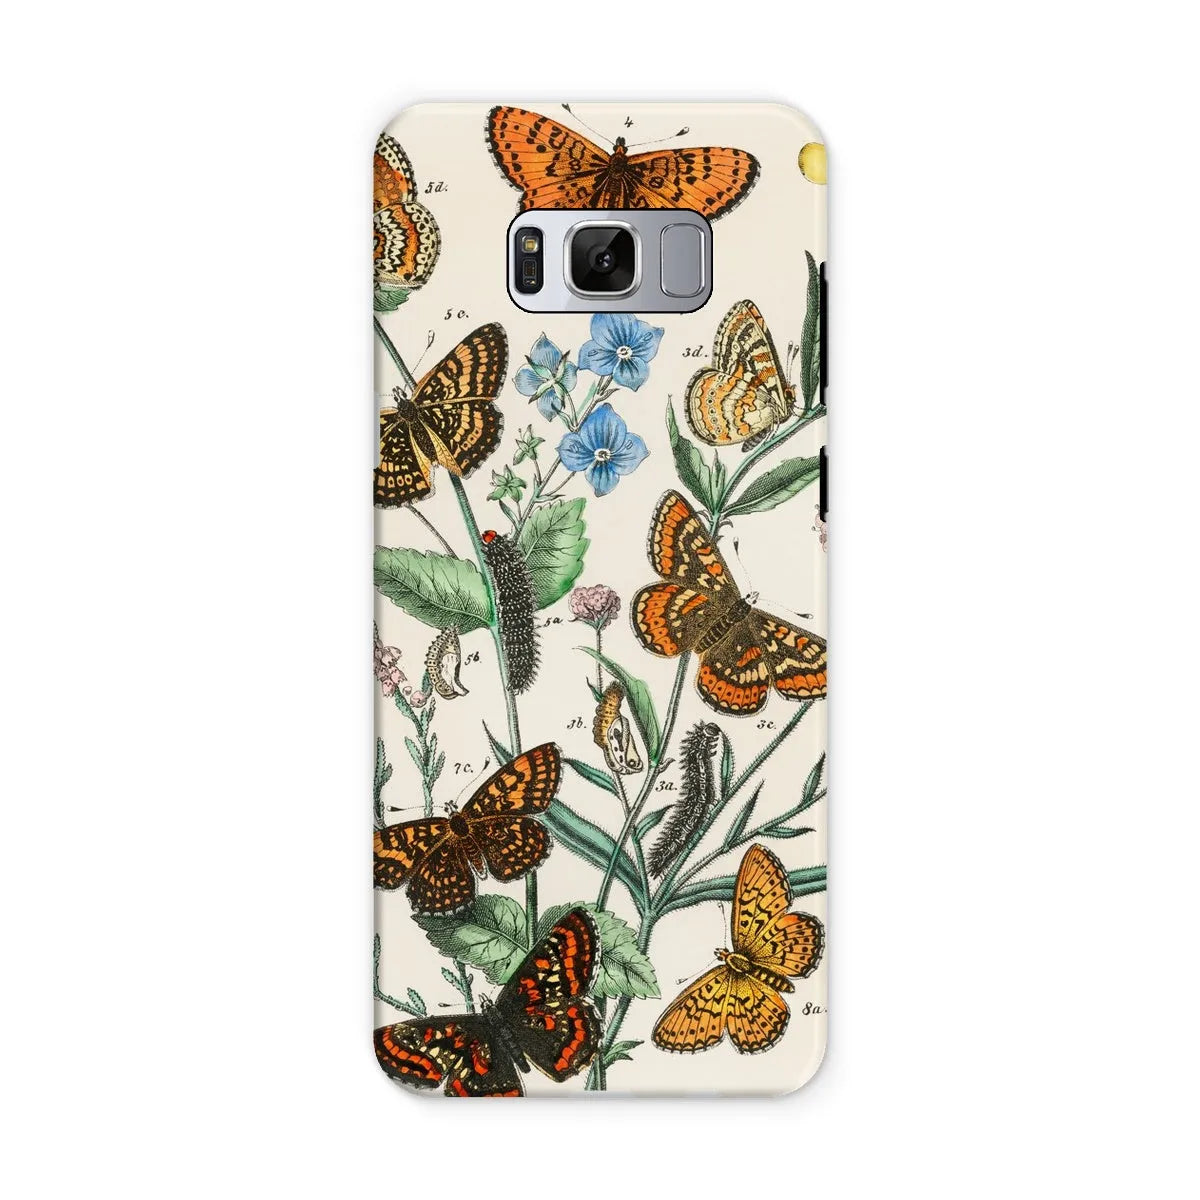 This Butterfly Aesthetic Art Phone Case - William Forsell Kirby - Samsung Galaxy S8 / Matte - Mobile Phone Cases